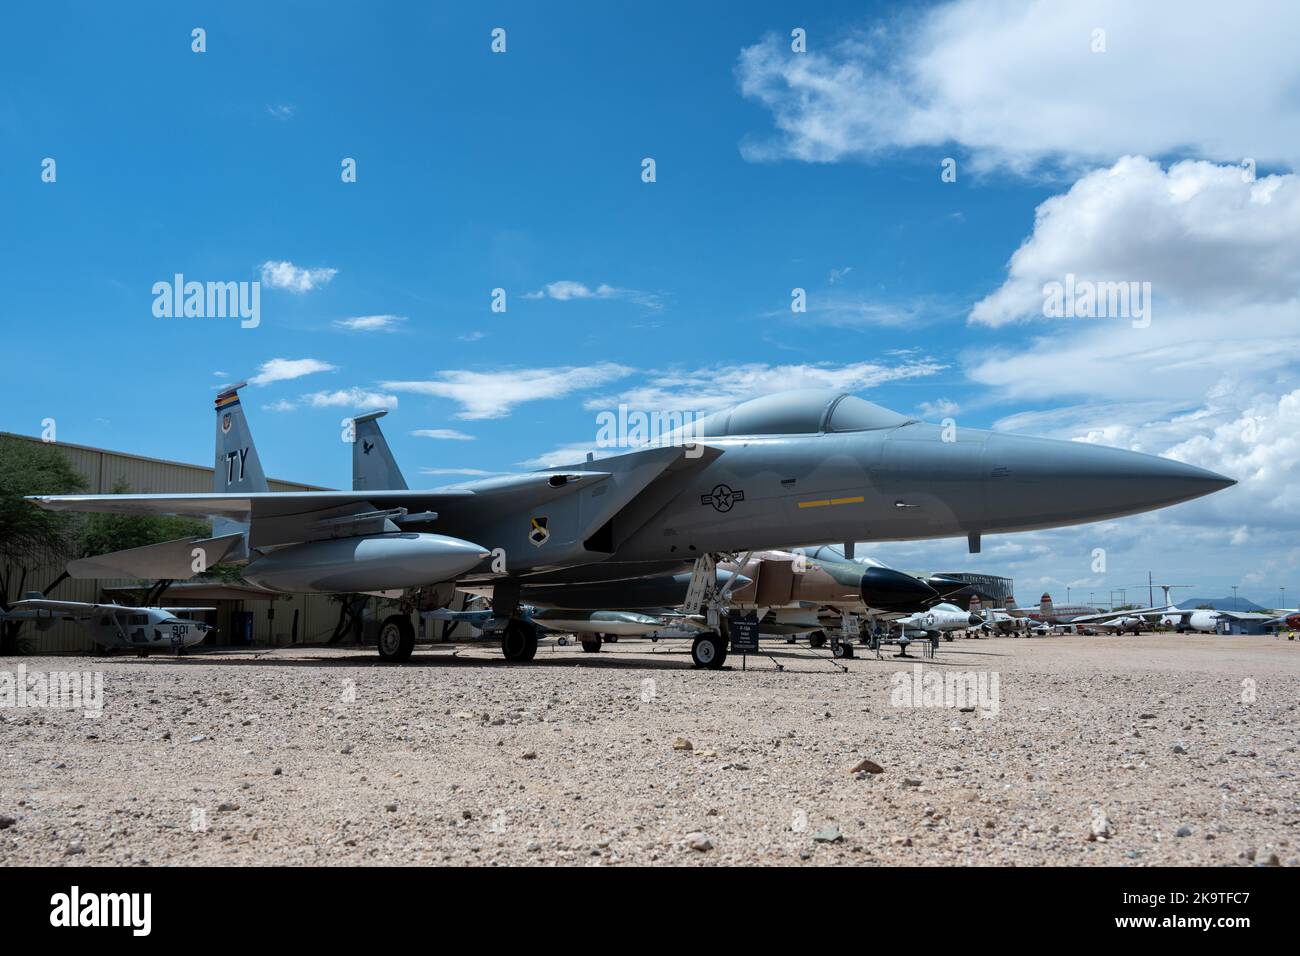 A F-15 Eagle on display at the Pima Air and Space Museum Stock Photo